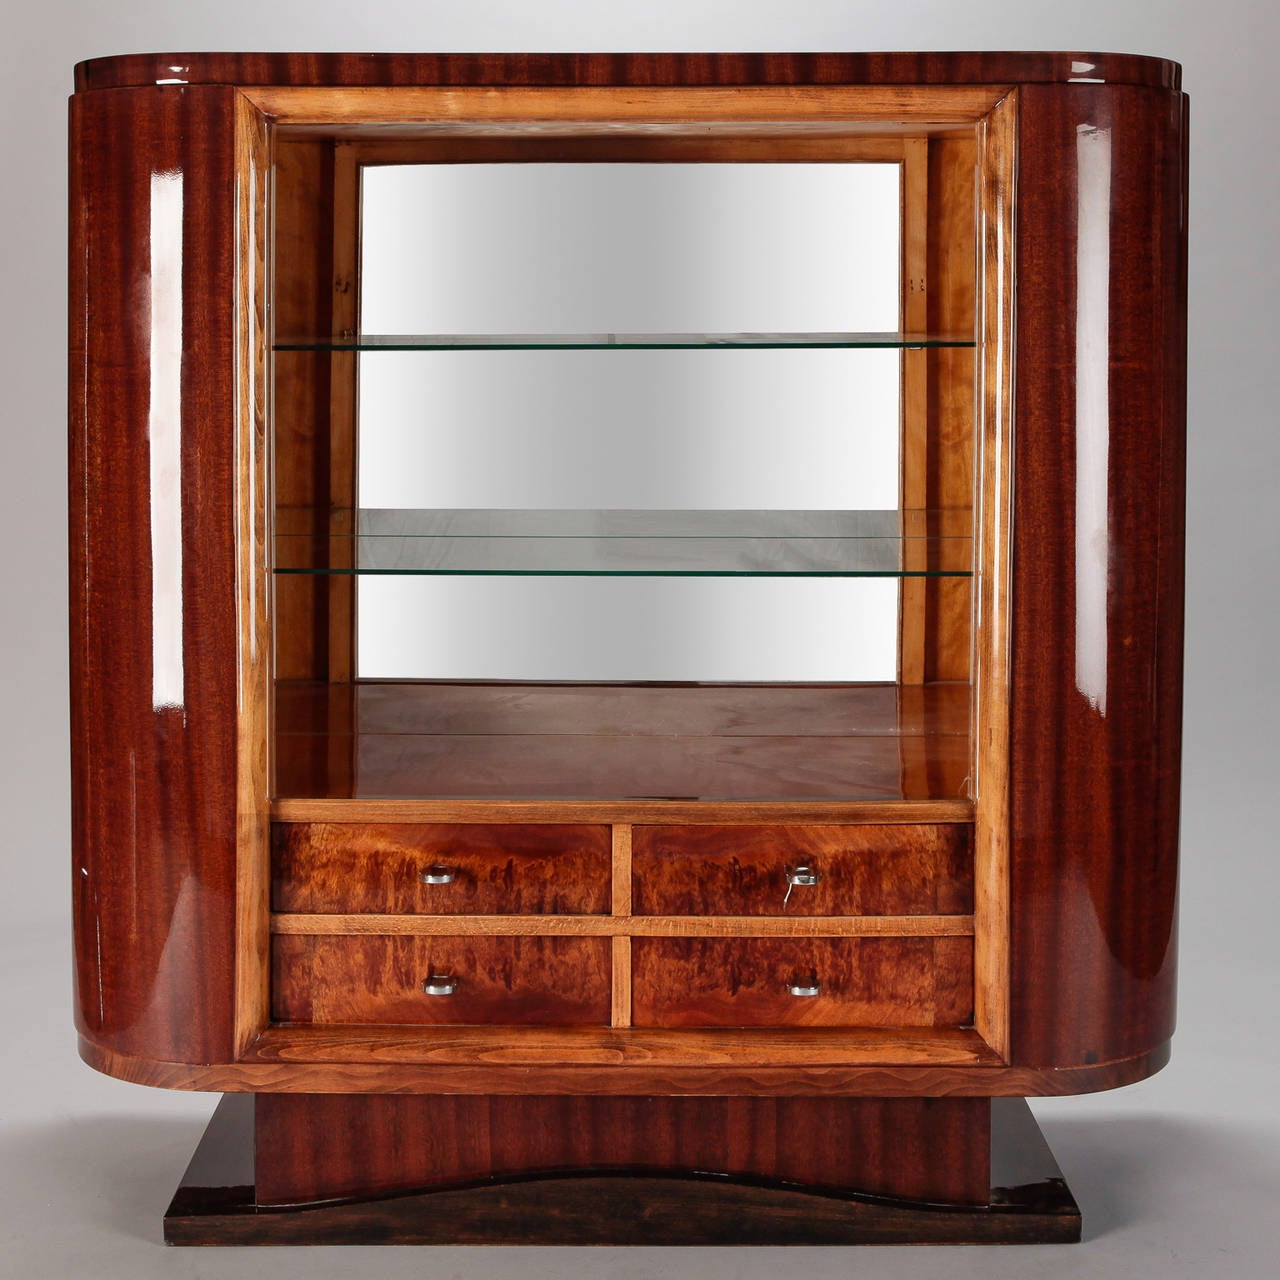 Circa 1930s French cabinet has a dark wood base, cabinet and drawers in contrasting polished blonde wood and darker wood with open glass shelves in the center and mirror back. Silver tone hardware. Elegant Deco-era curves. Makes a great piece for